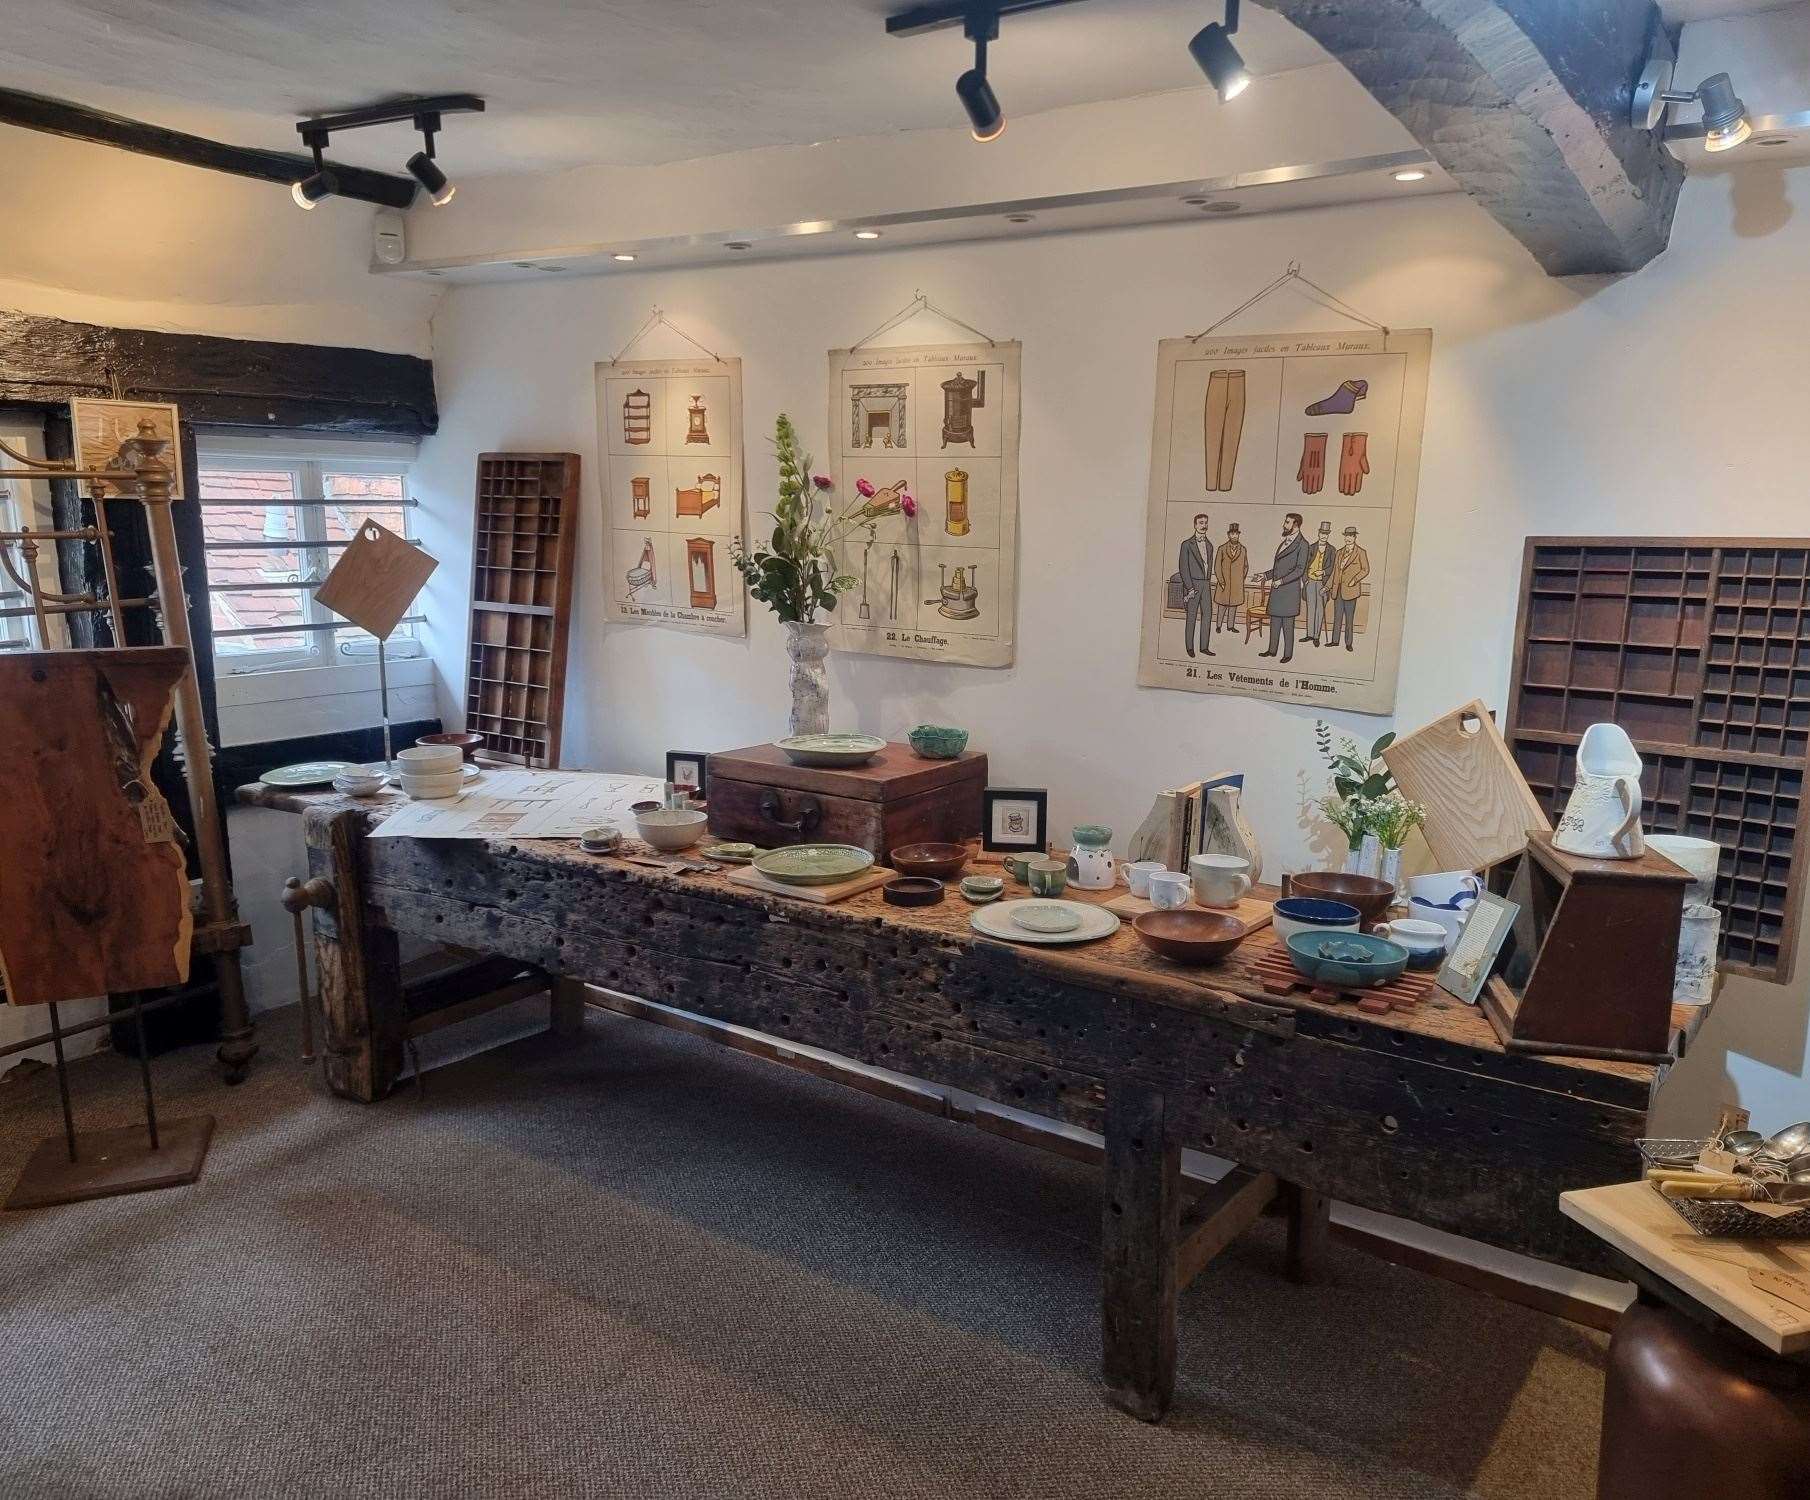 Made by Bayliss and Co has opened in Tenterden High Street. Picture: Beth Bayliss